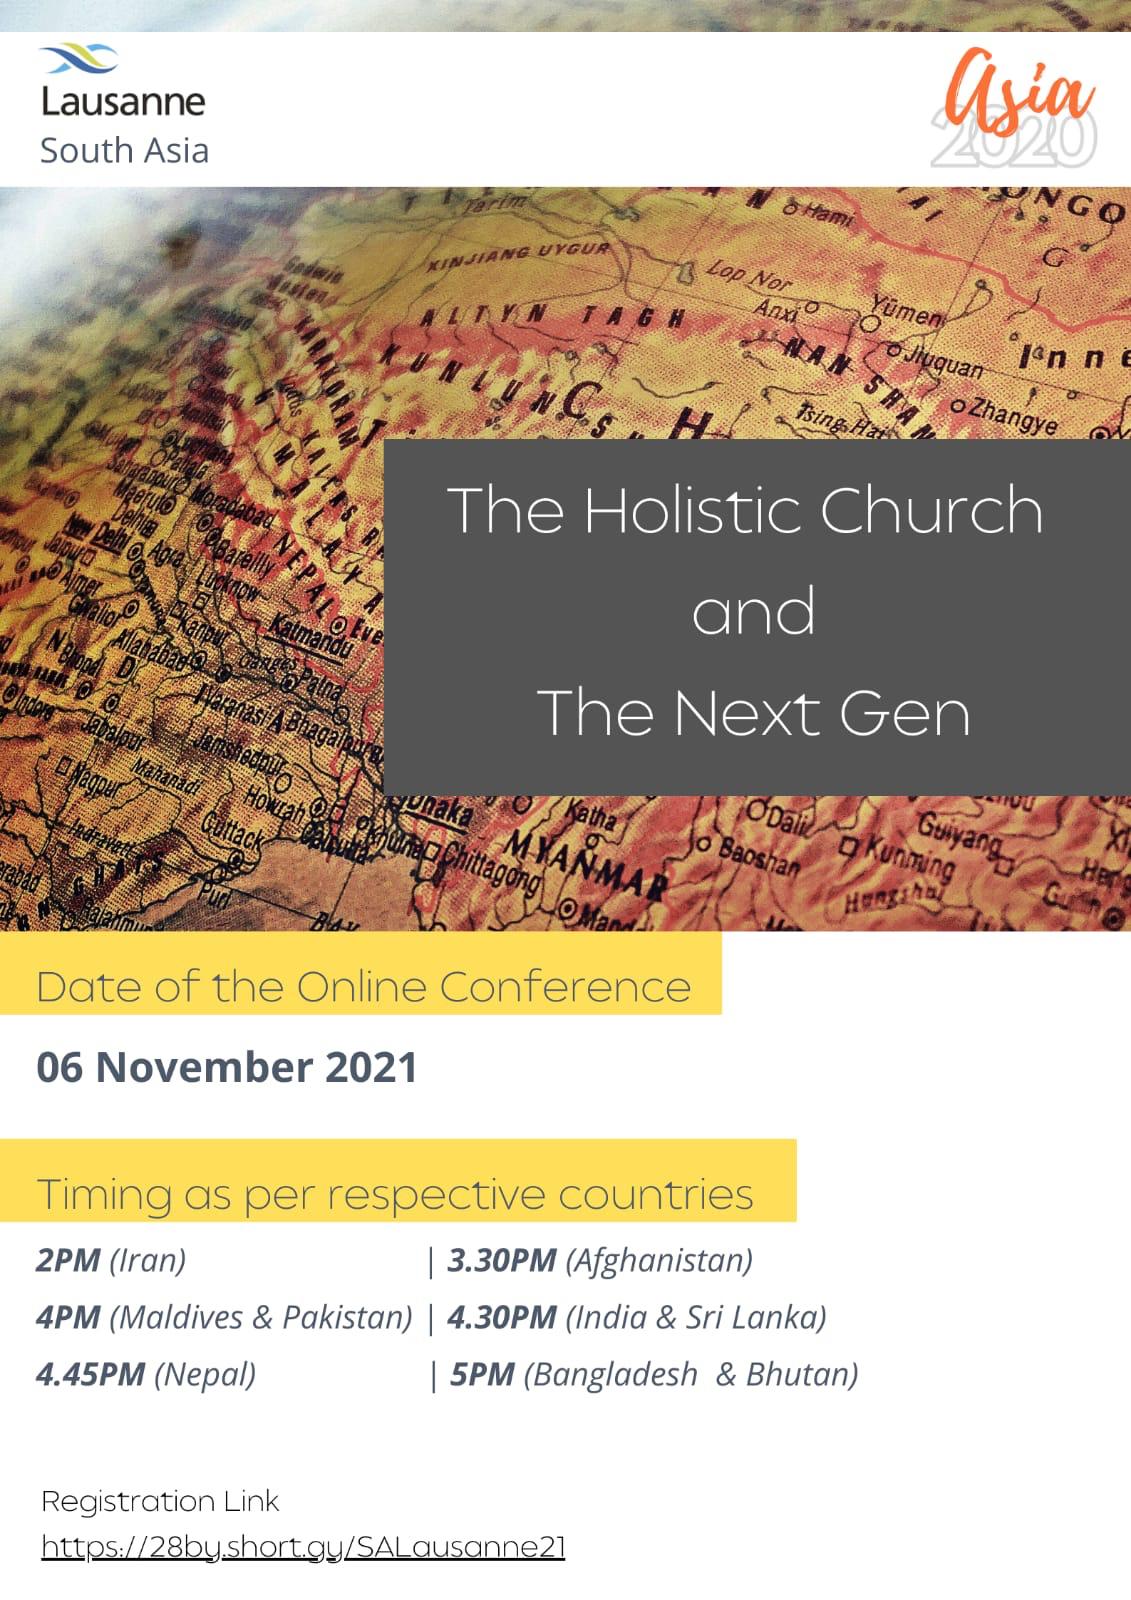 The Holistic Church and The Next Gen